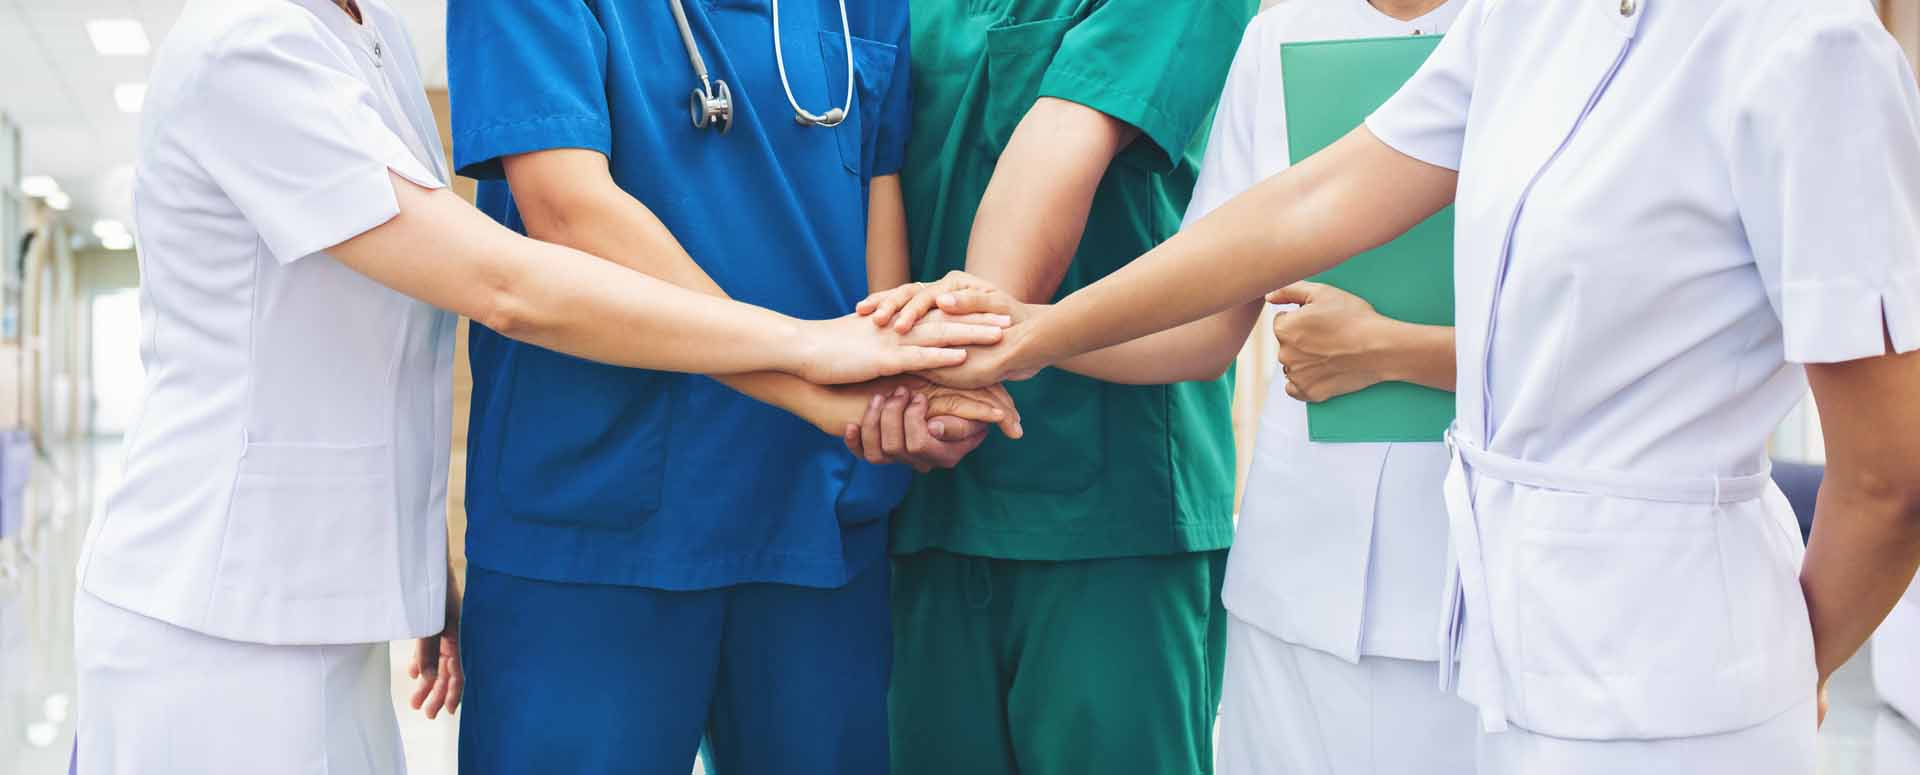 Cooperation of people in the medical community